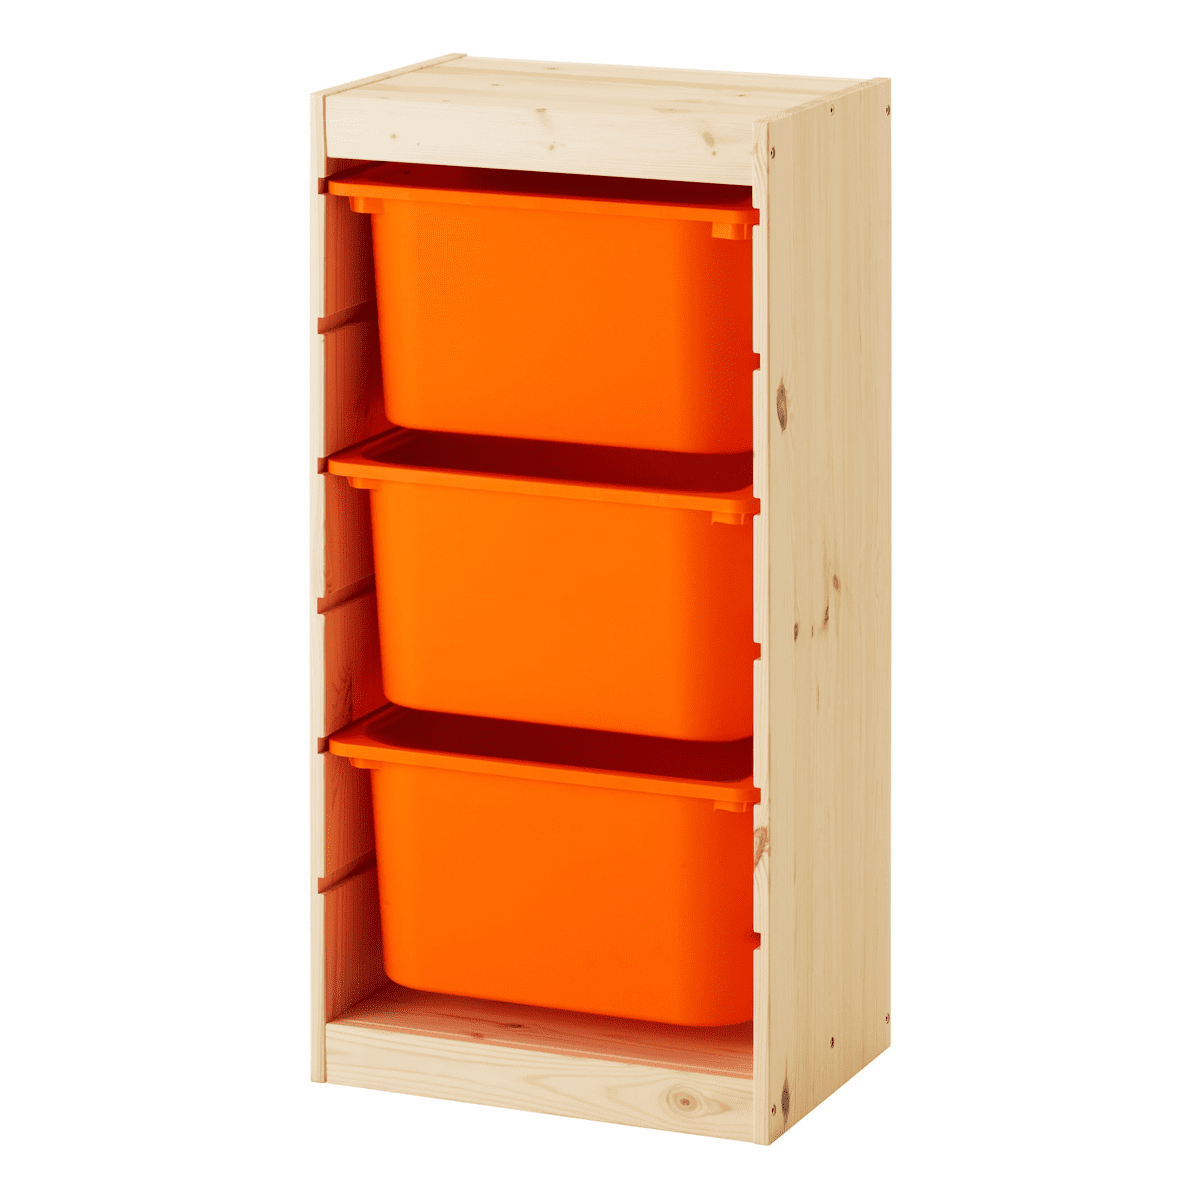 TROFAST Storage combination with boxes, pine light white stained pine, orange